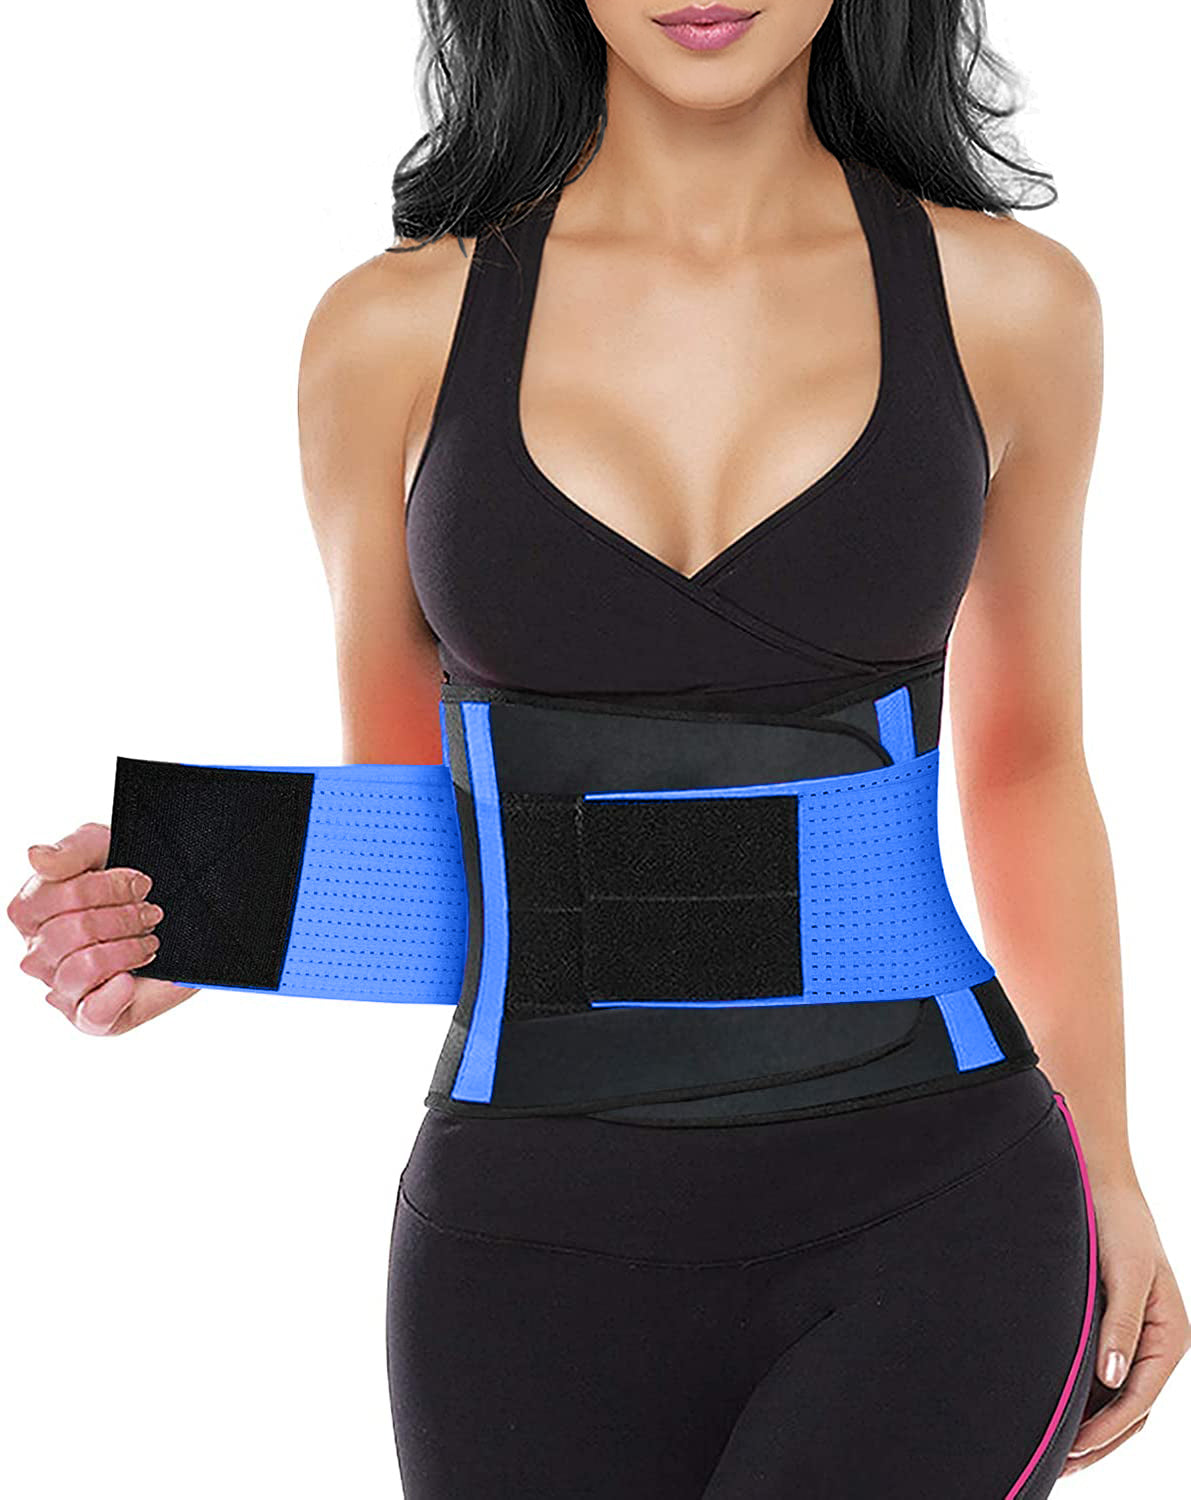 Yianna Waist Trainer Sweat  Buy yianna waist trainer with free shipping on  AliExpress!